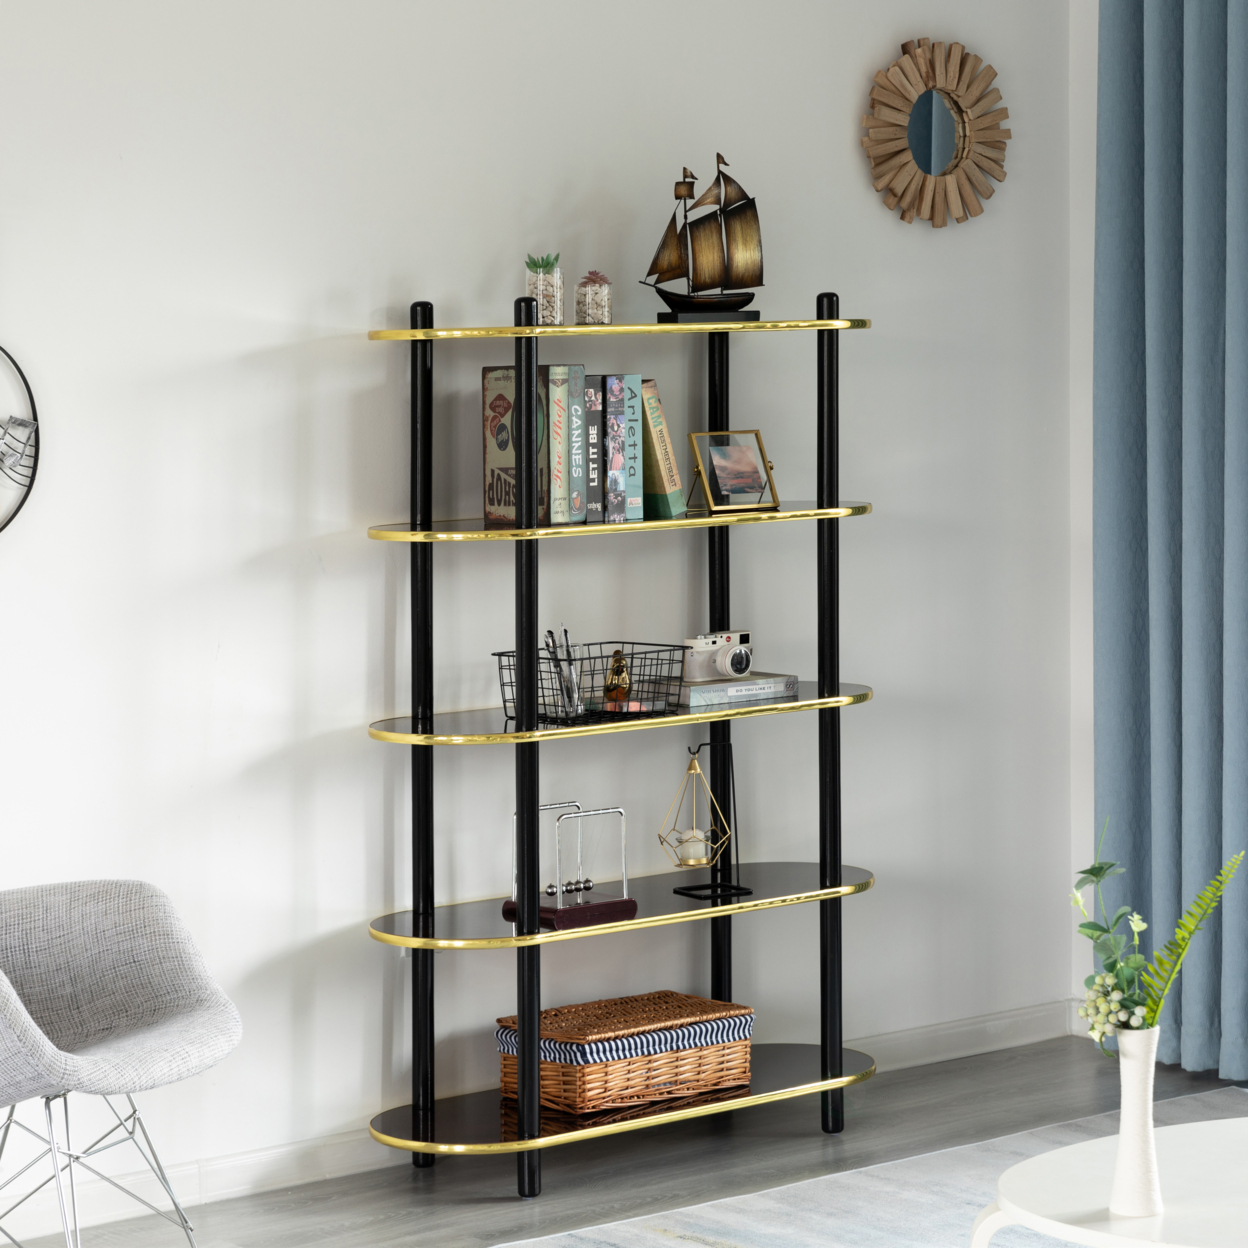 5 Tier Open Bookshelf, Contemporary Classic Modern Style Free Standing Wood Display Rack Unit For Collections,59 Height Etagere Bookcase -